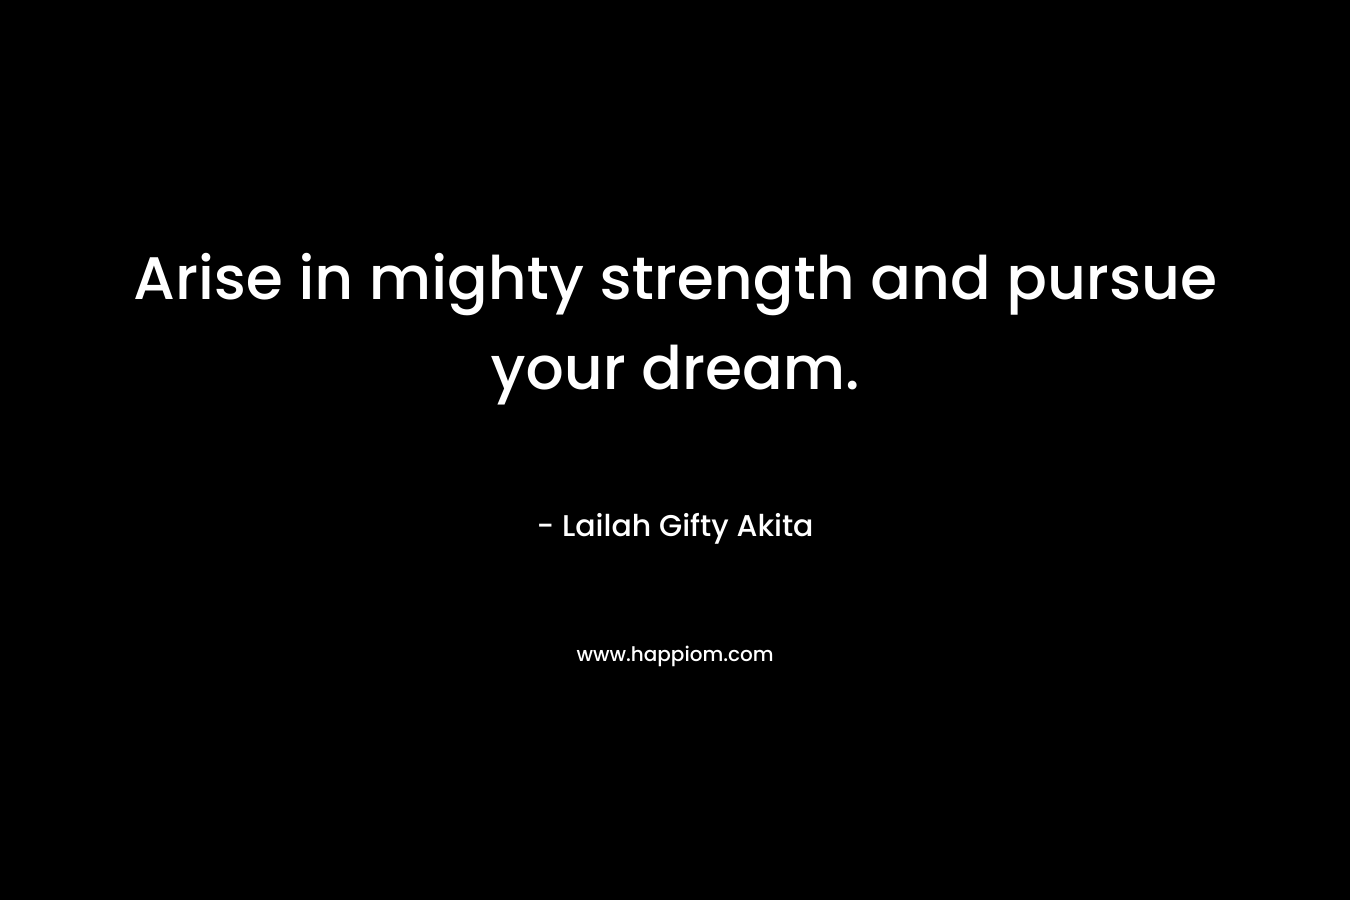 Arise in mighty strength and pursue your dream.